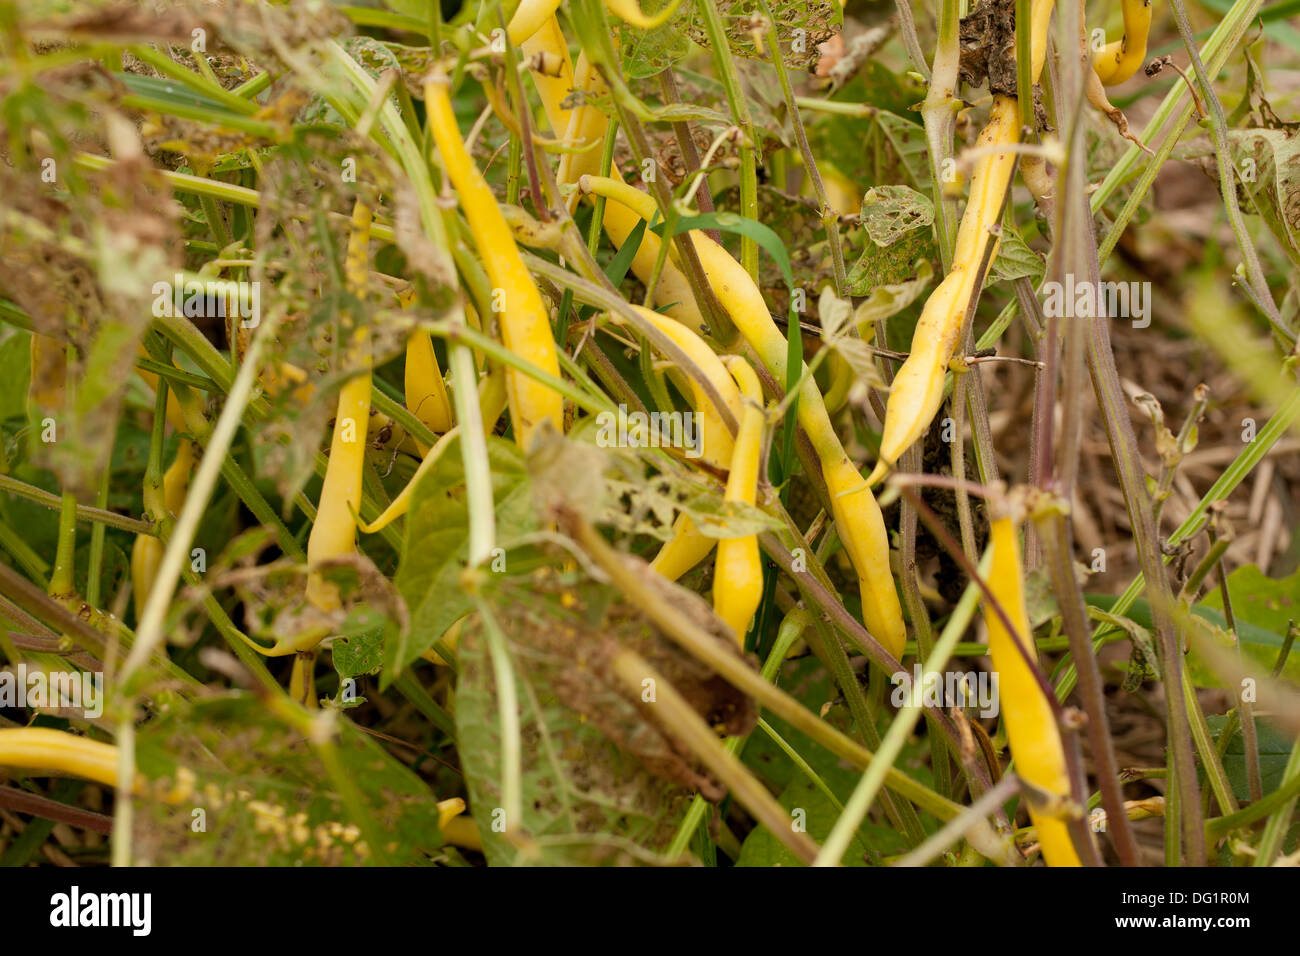 Bush yellow wax beans cling  to plants whose leaves are riddled with insect holes. Stock Photo